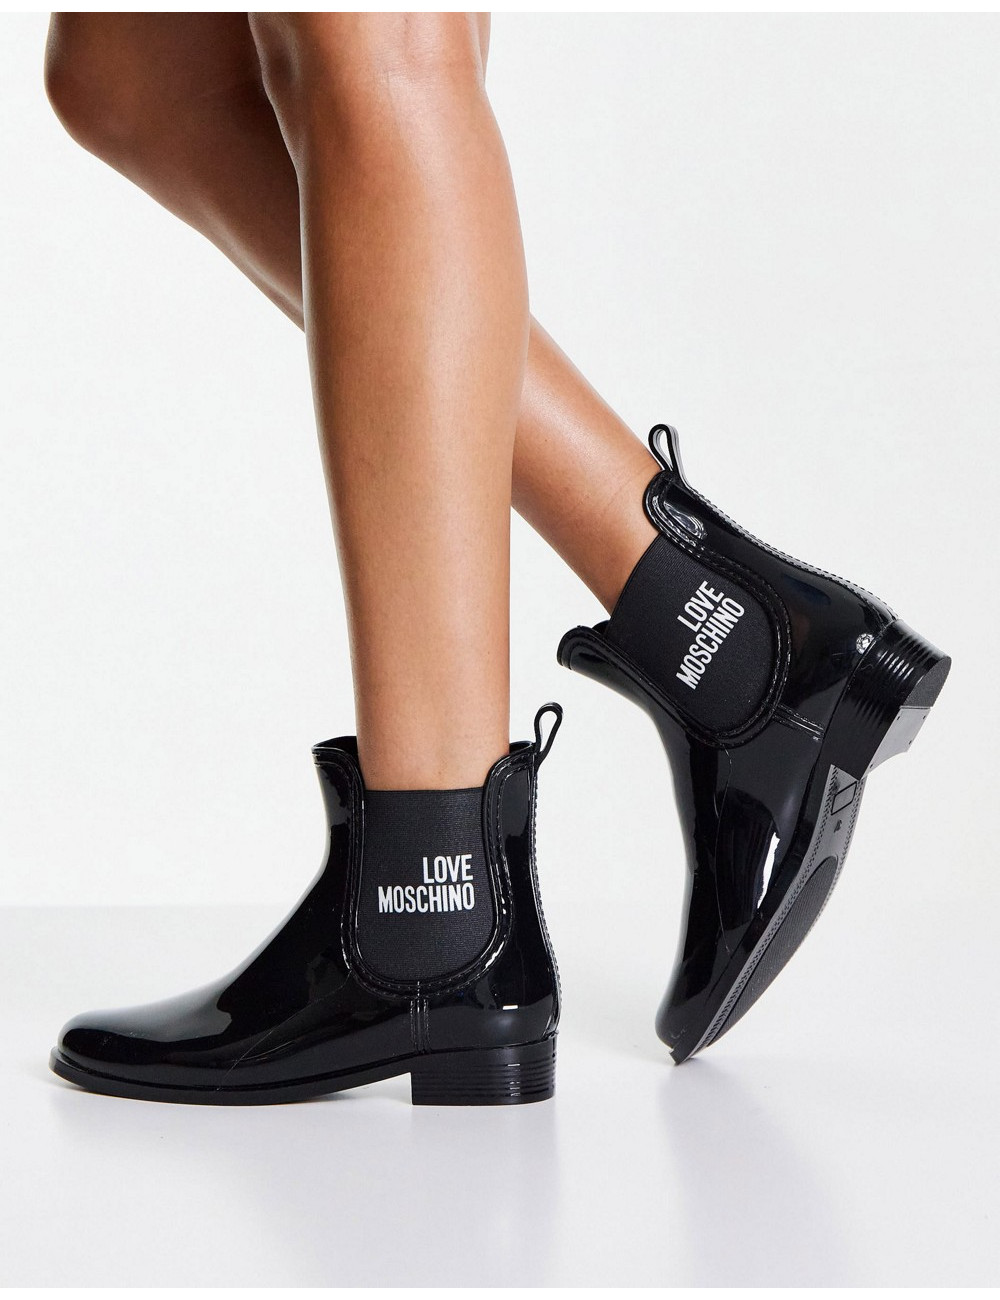 Love Moschino pull on boot...